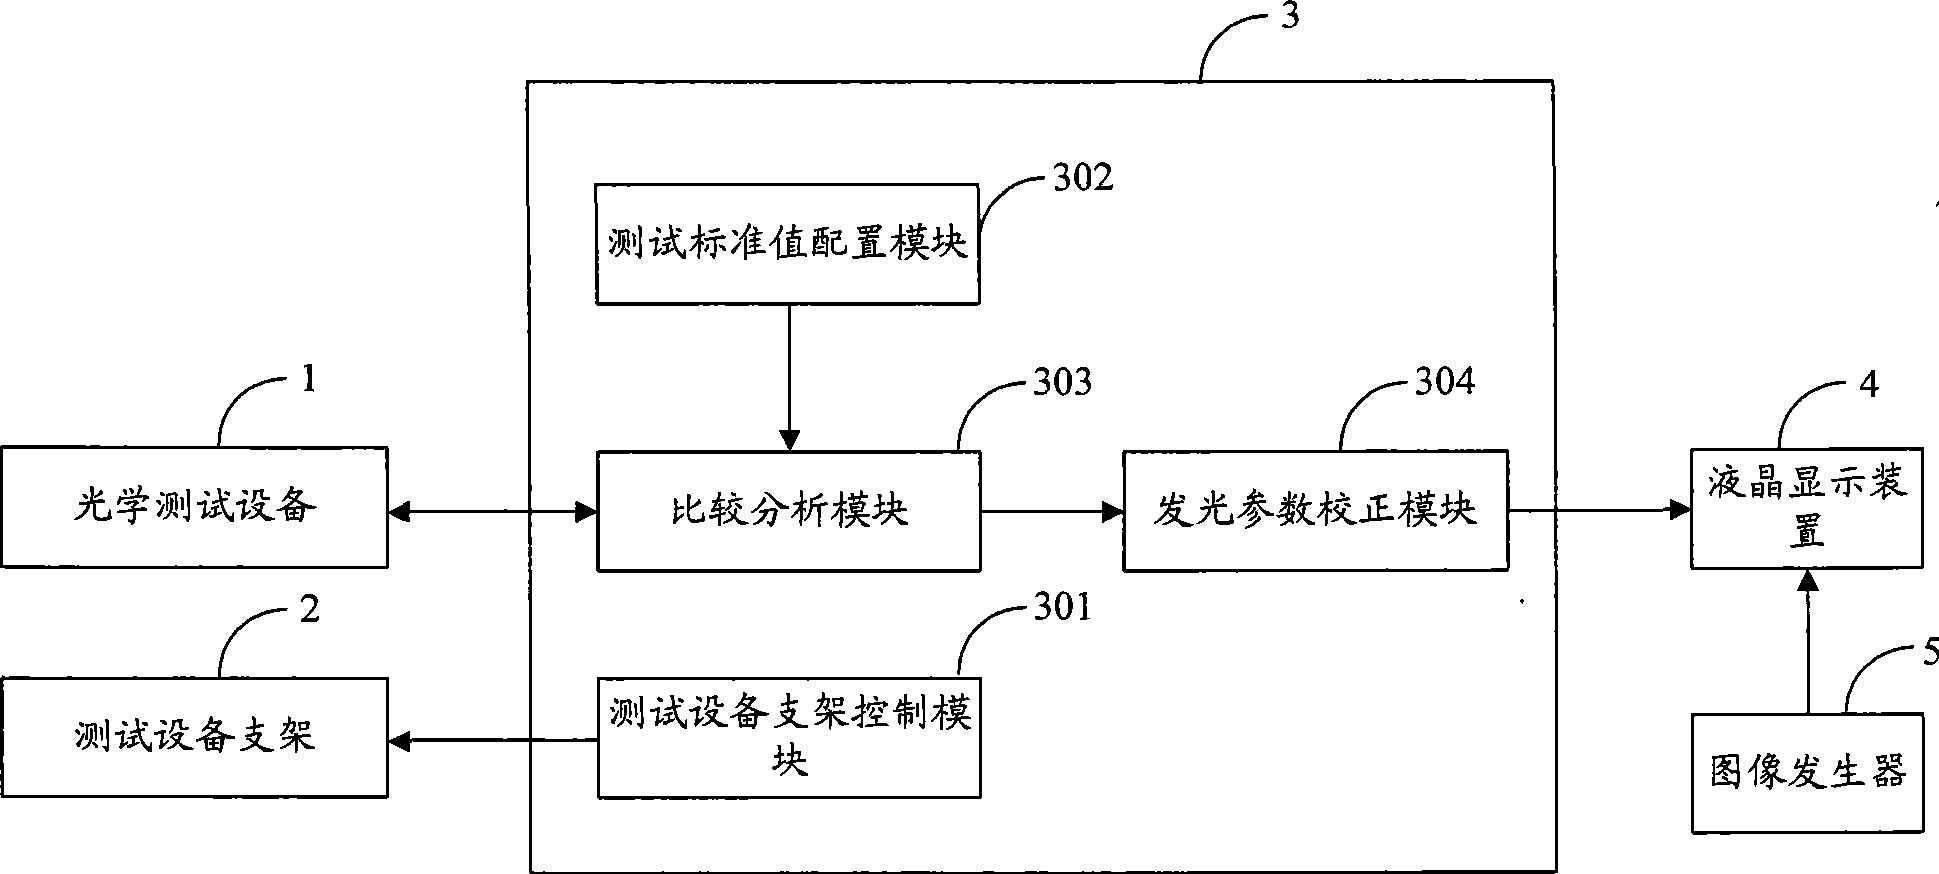 Method and device for correcting luminous parameters of LCD device